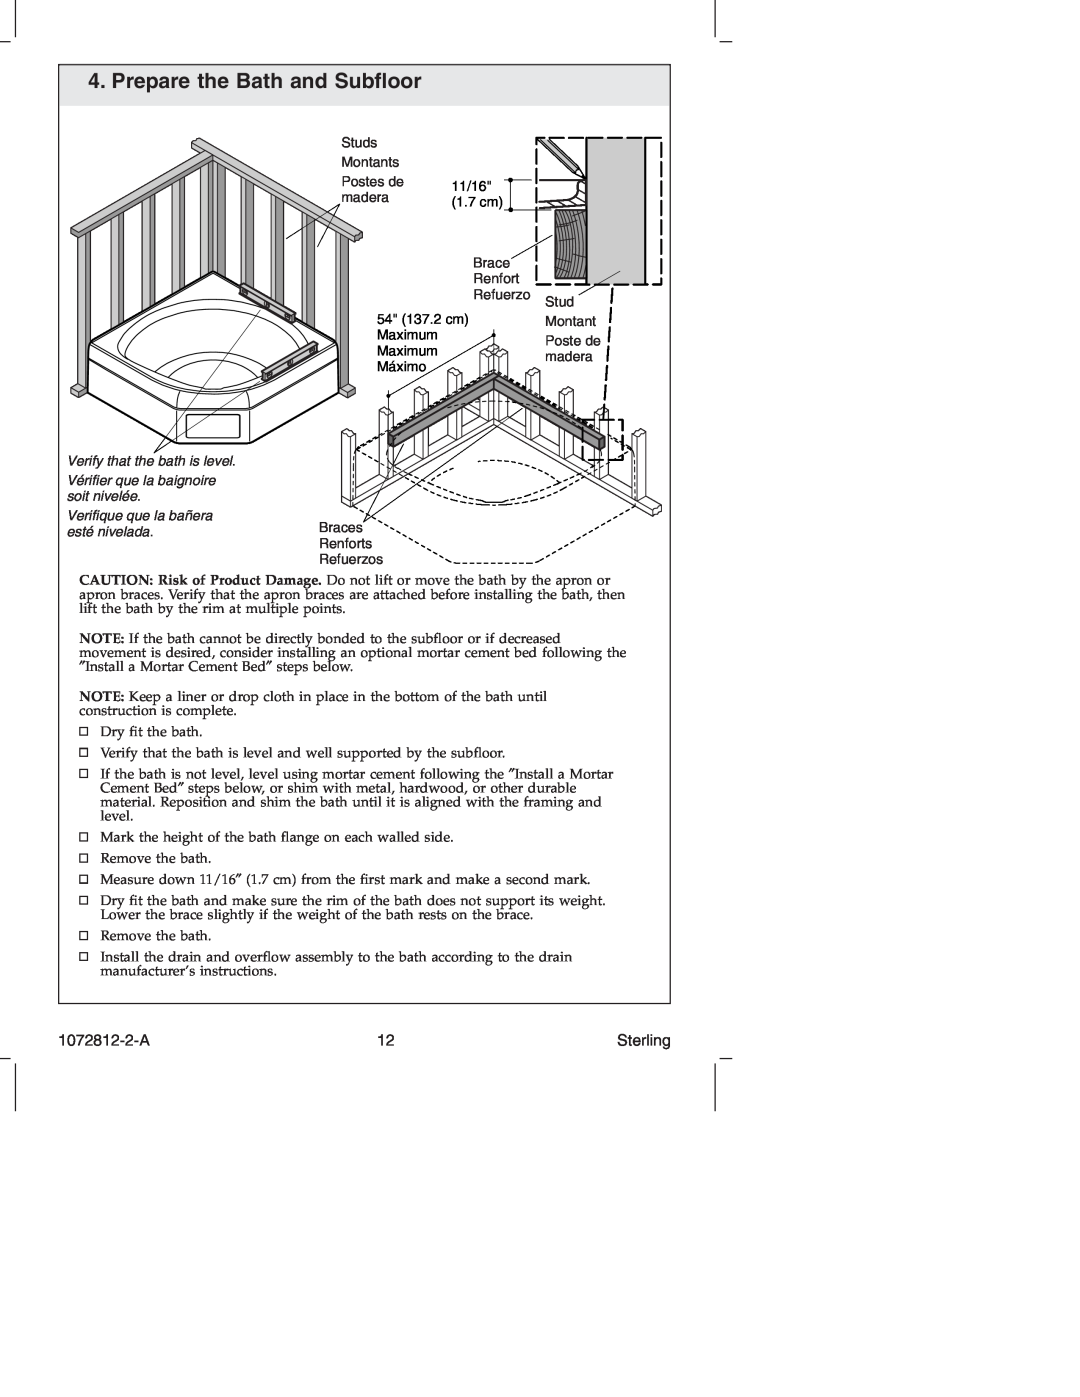 Sterling Plumbing 7113 Series manual Prepare the Bath and Subﬂoor, 1072812-2-A 